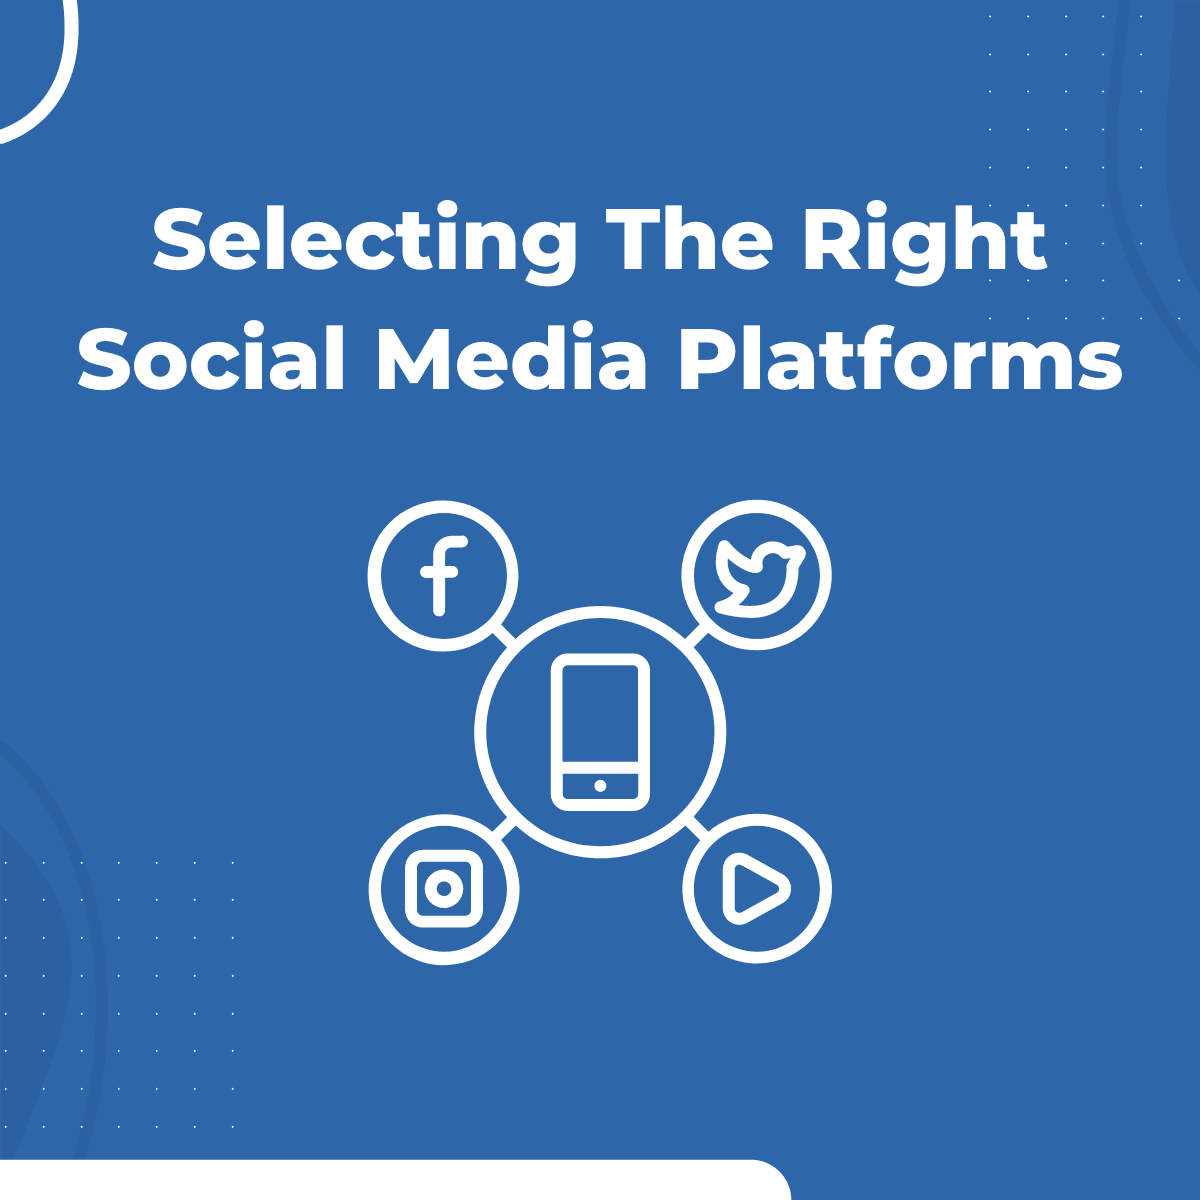 Selecting The Right Social Media Platforms For Your Business